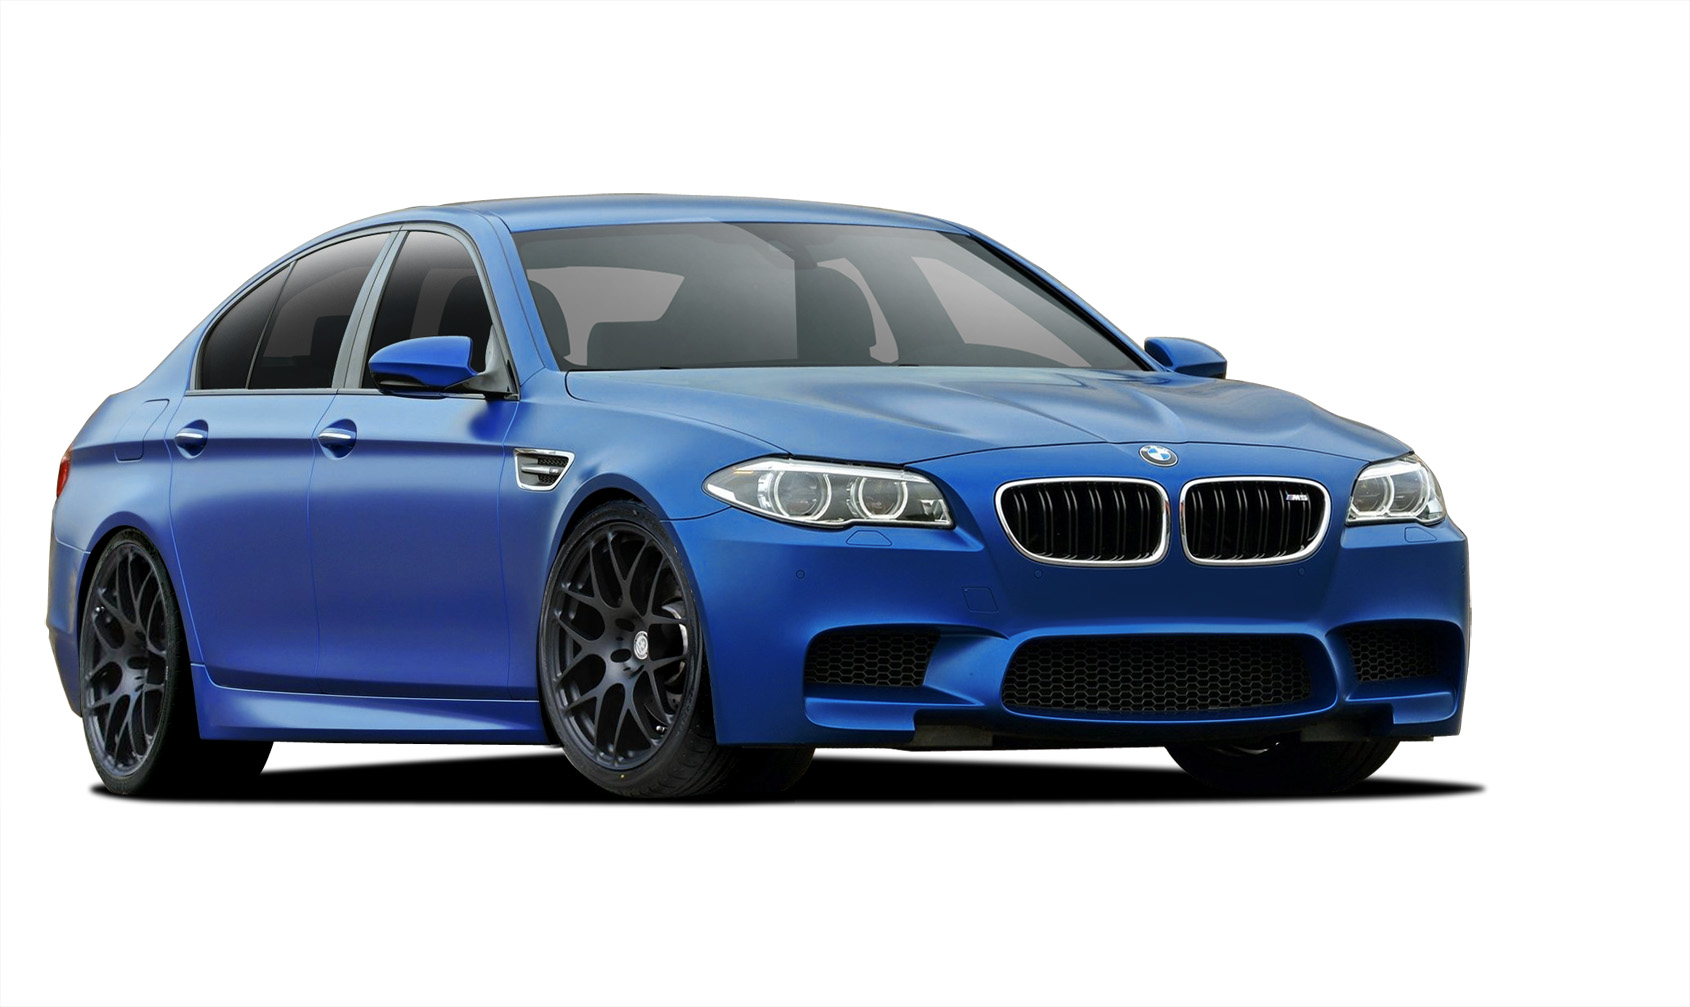 Polypropylene Body Kit Bodykit for 2016 BMW 5 Series 4DR - BMW 5 Series F10 Vaero M5 Look Conversion Kit ( with PDC , with Washer , without Camera ) -